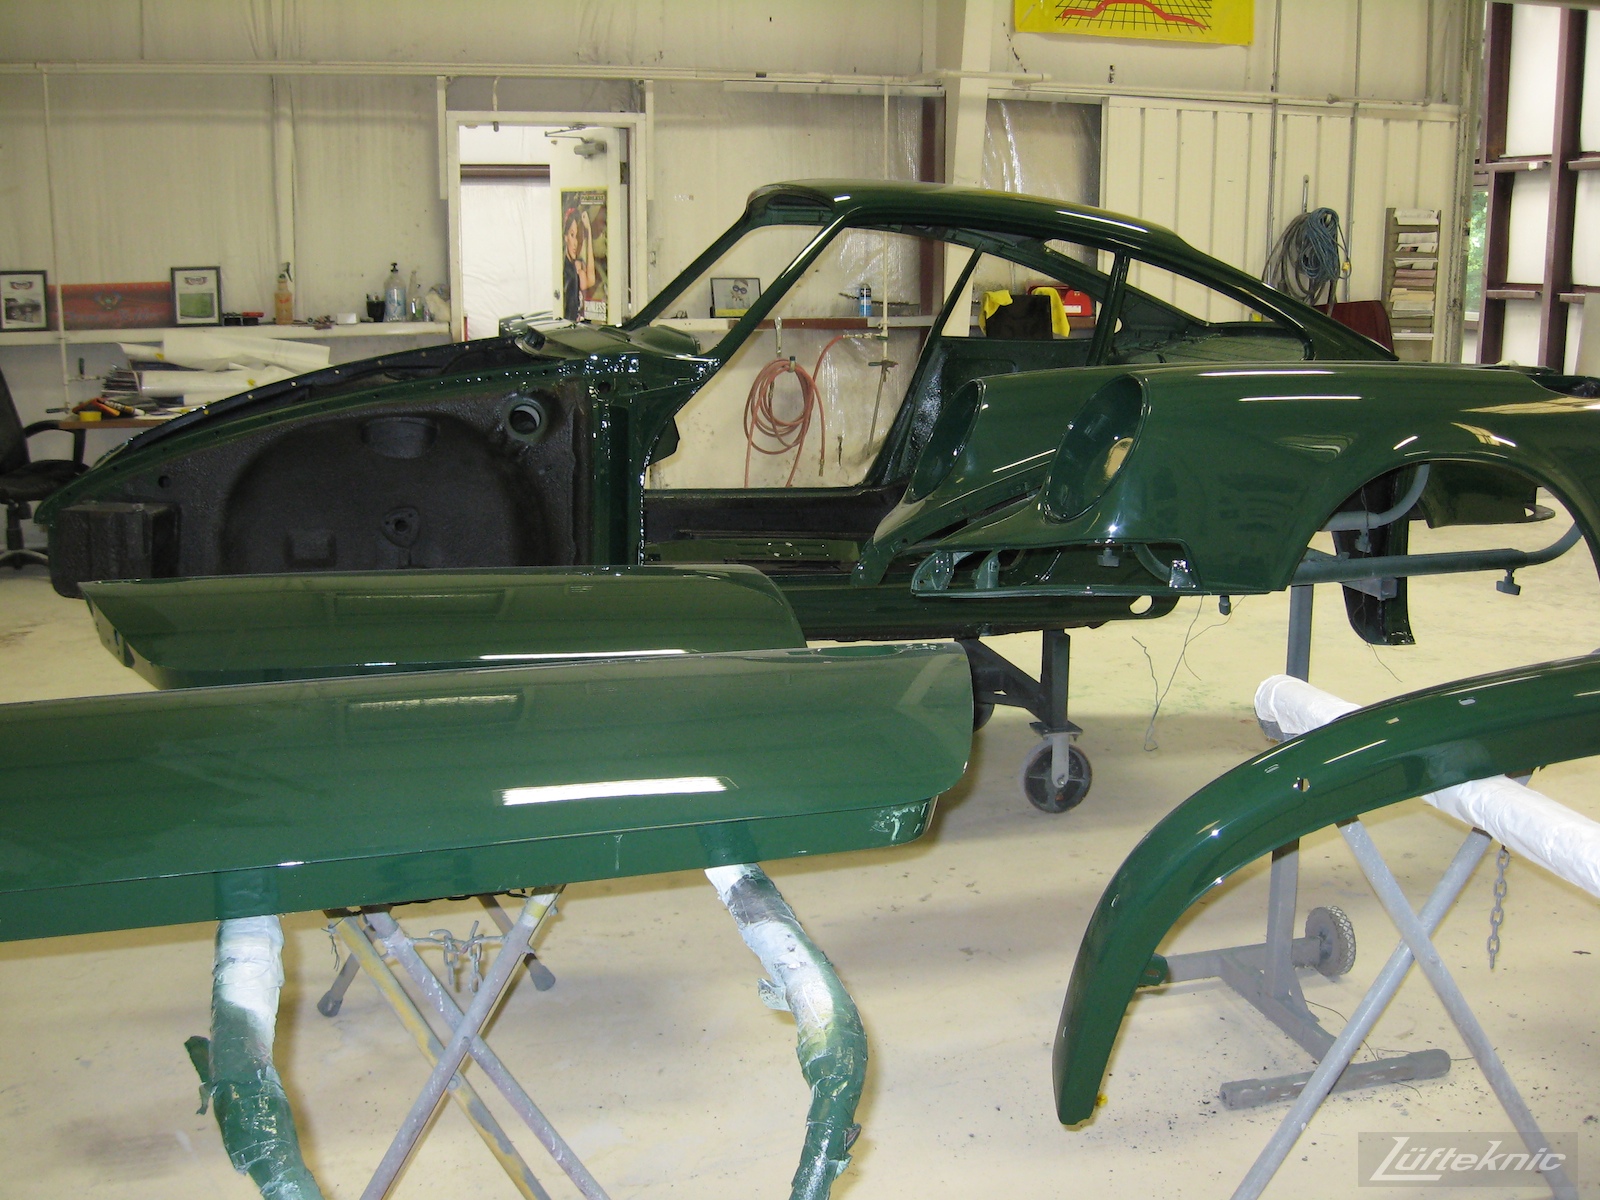 Freshly painted body panels and shell of an Irish Green Porsche 912 undergoing restoration at Lufteknic.